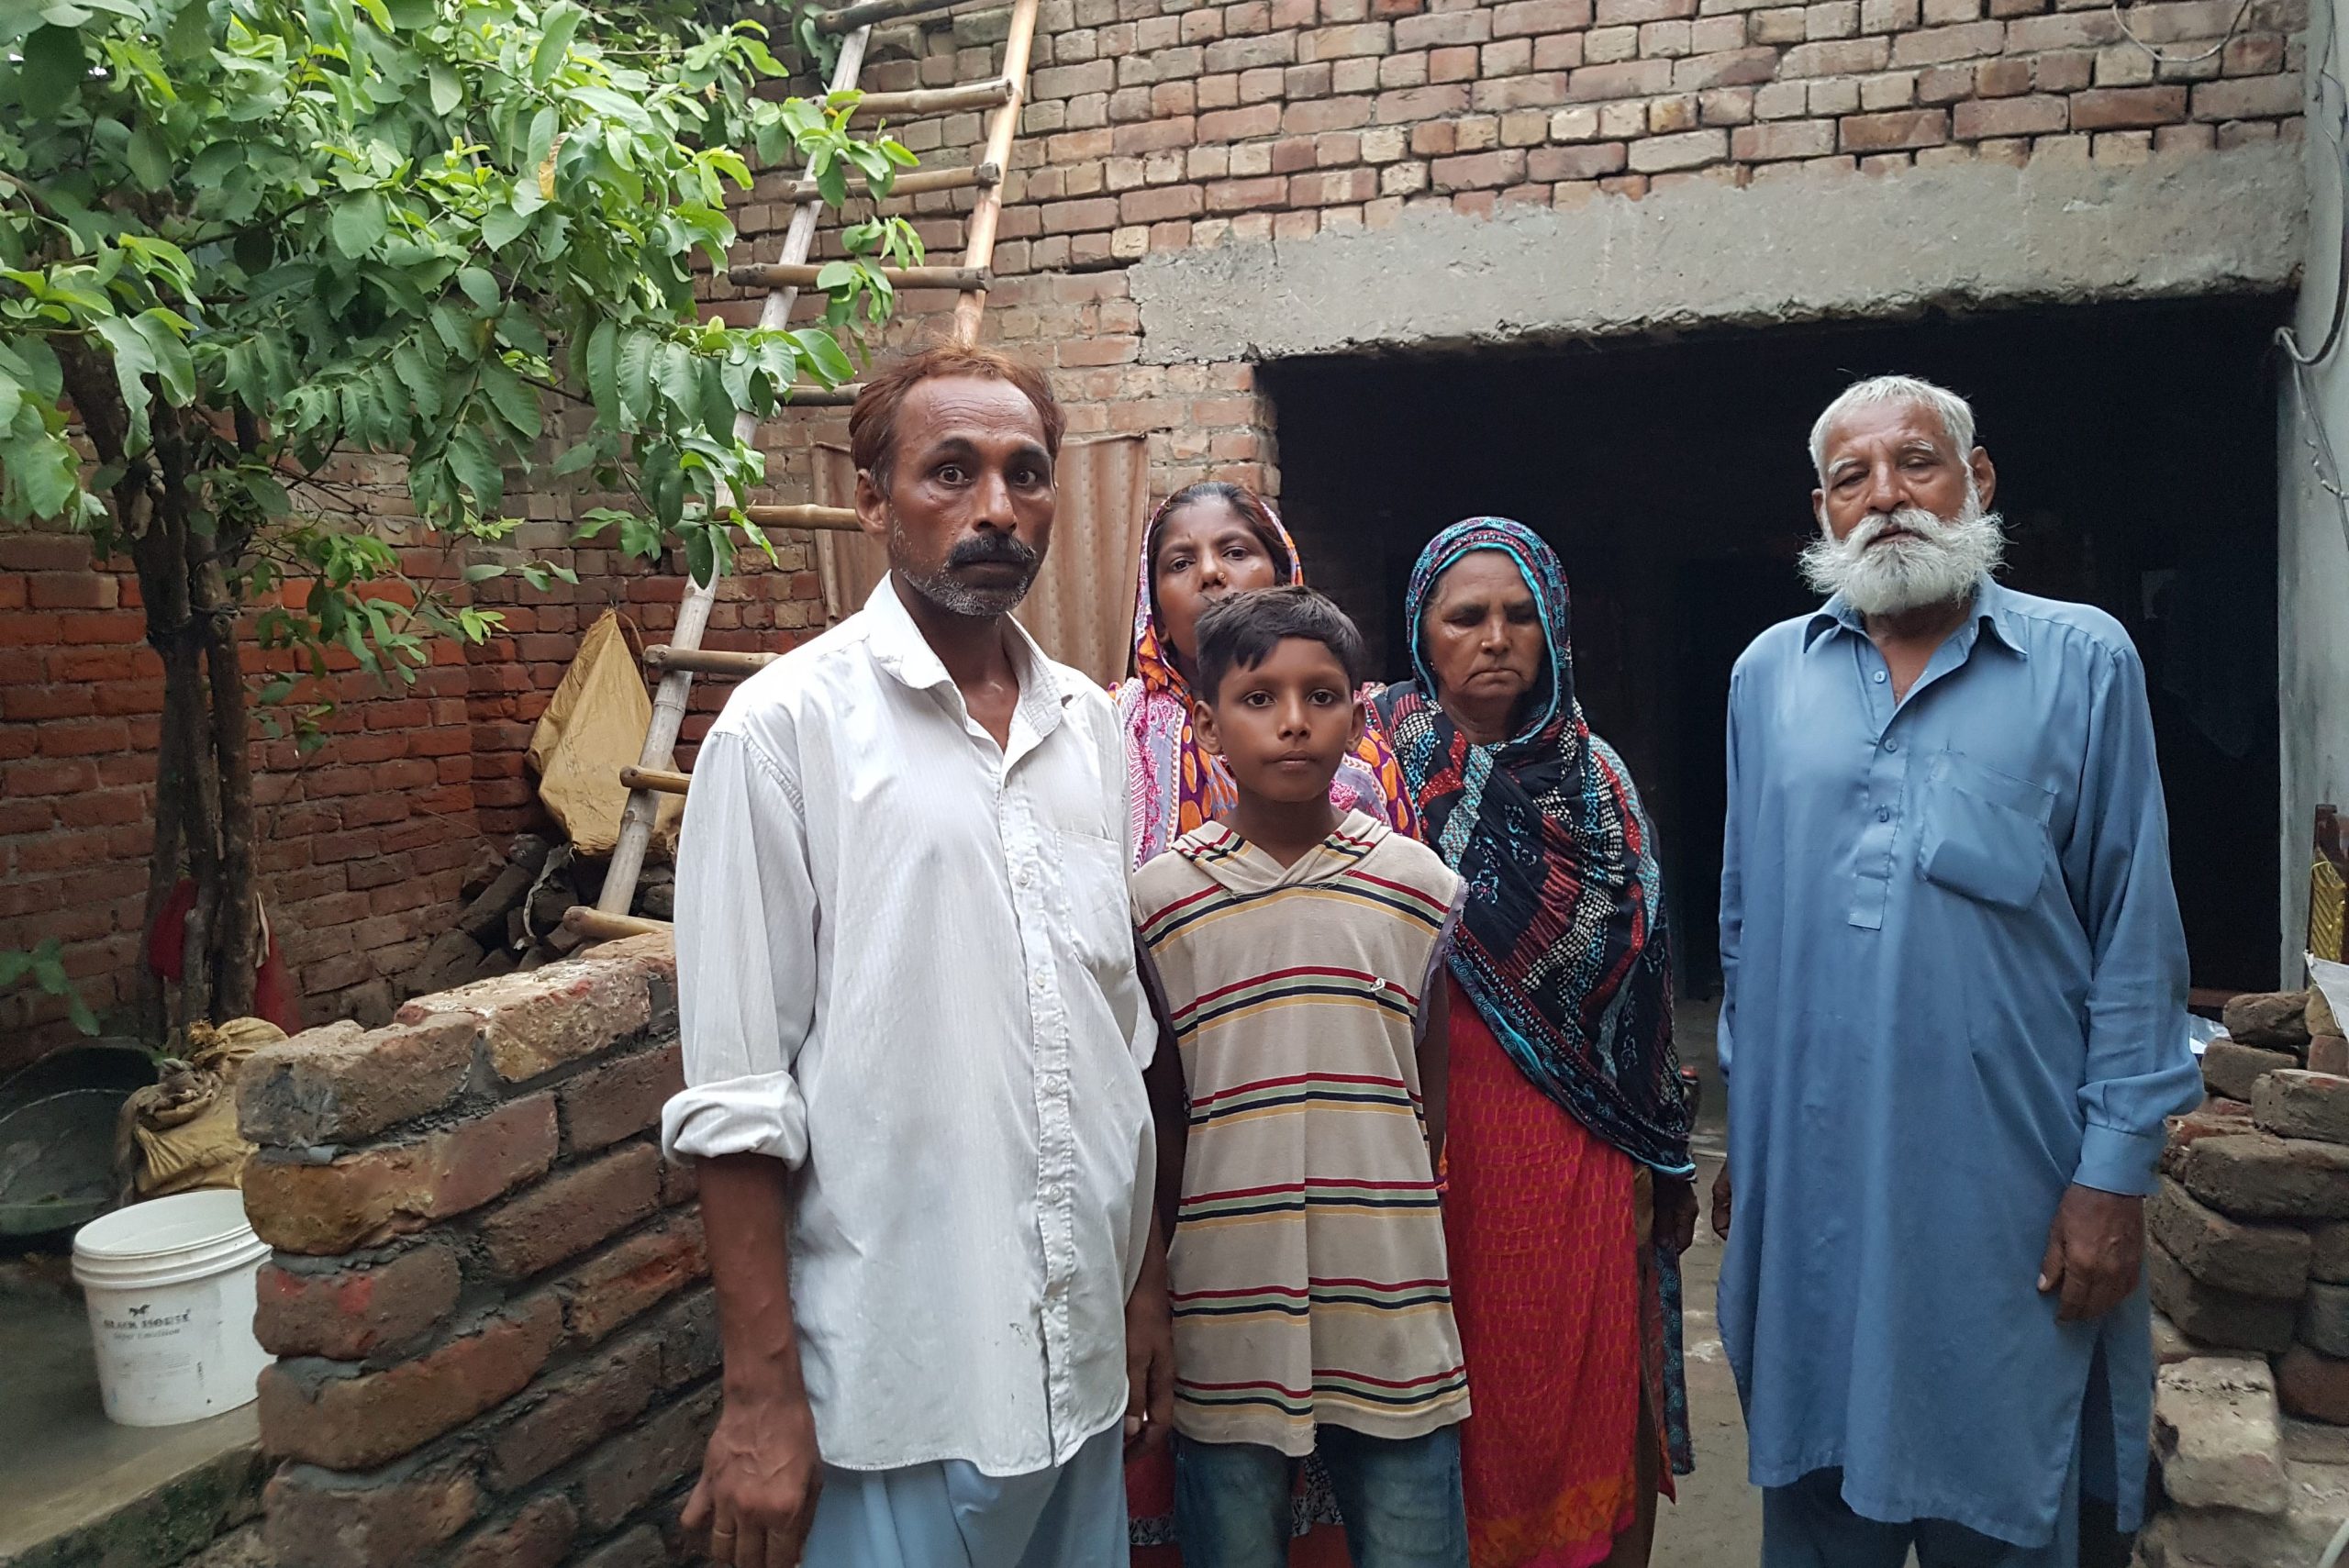 Images: Amjar Arif (left) with his family (© Aid to the Church in Need)